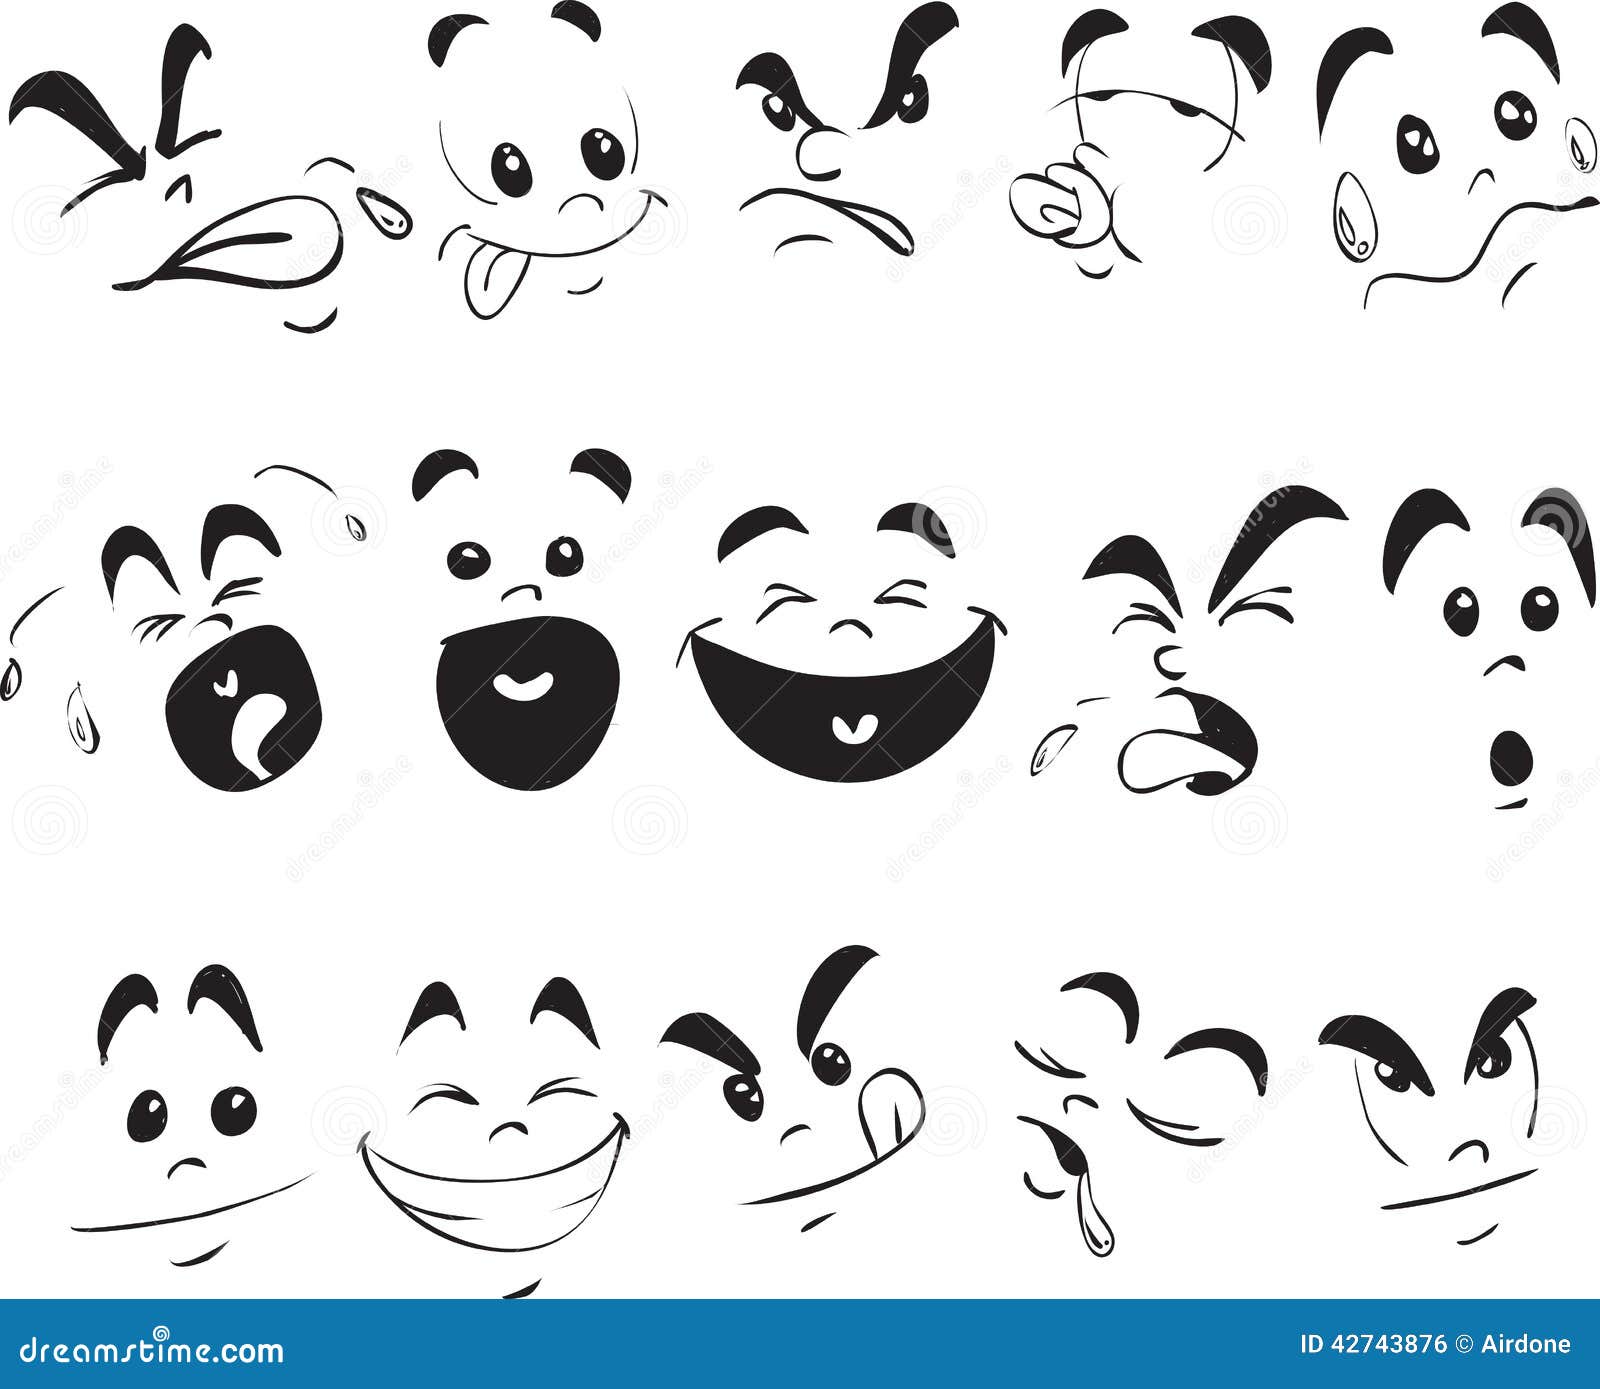 Children Face Expression Doodle Stock Vector - Image: 42743876